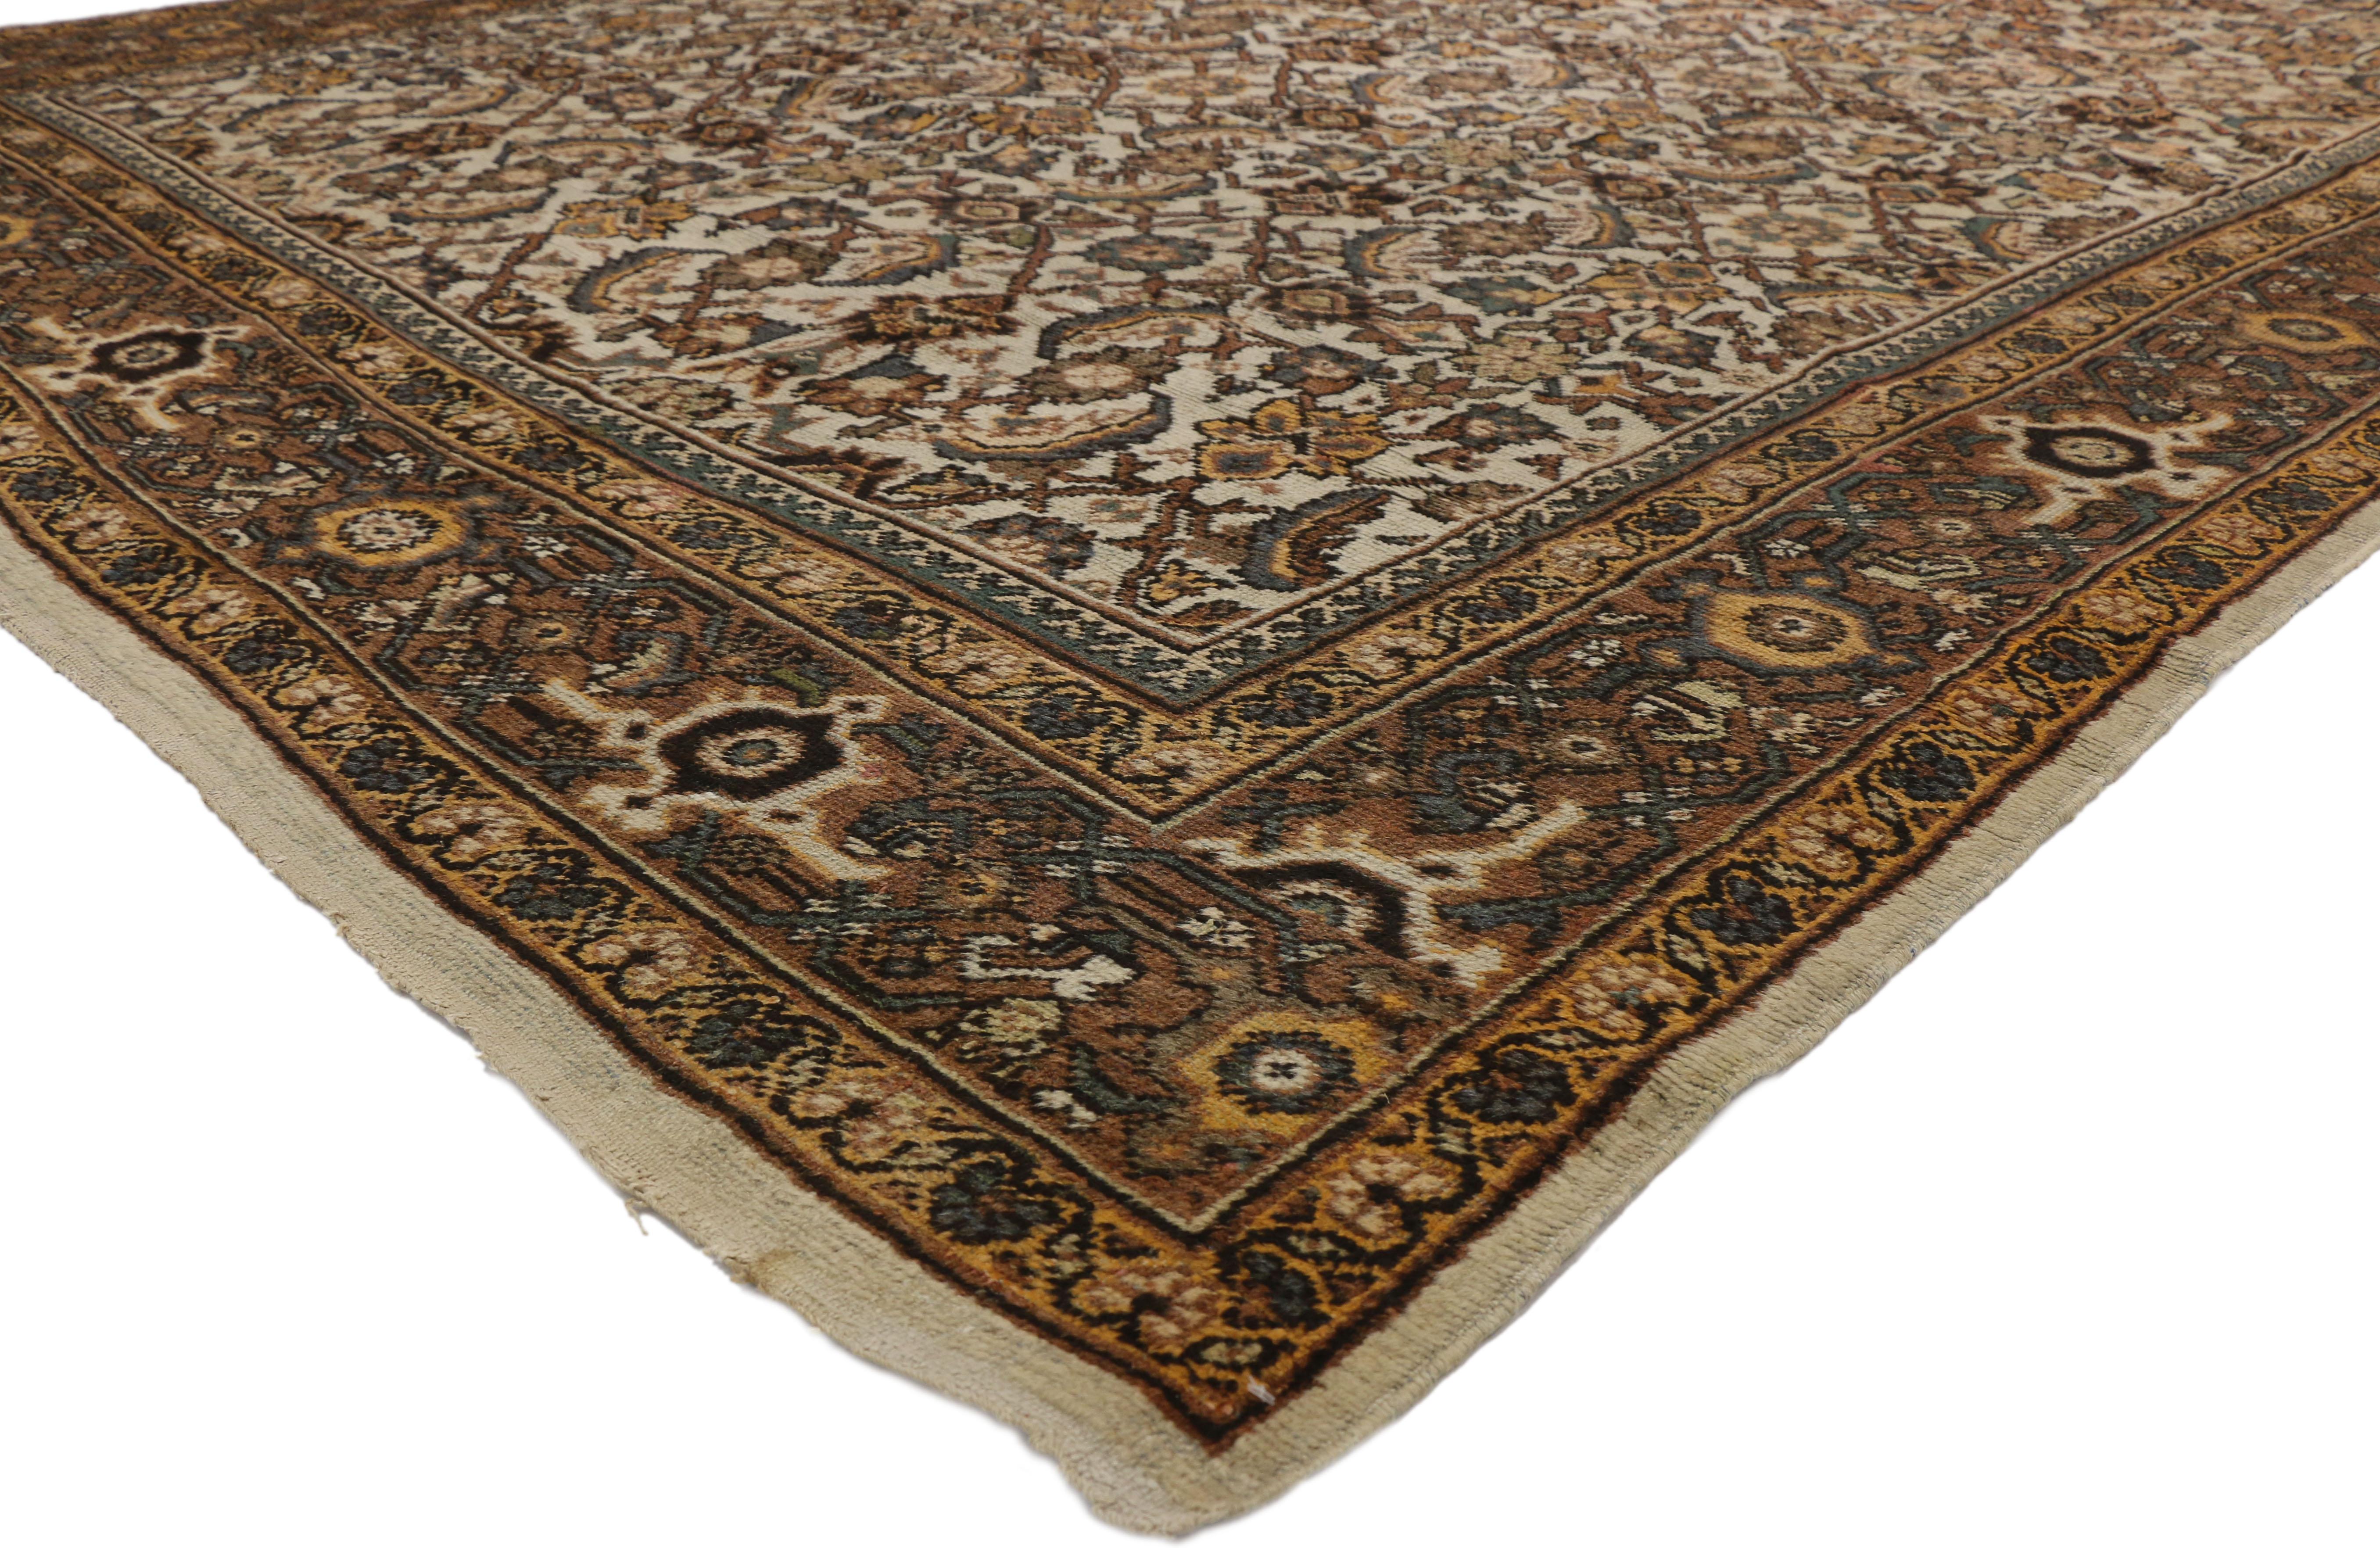 72504 Antique Persian Mahal Rug with Herati Pattern and Rustic Arts & Crafts Style. Sophisticated and full of character, this antique Persian Mahal rug combines traditional character with mid-century modern style. With its bold elemental nature and